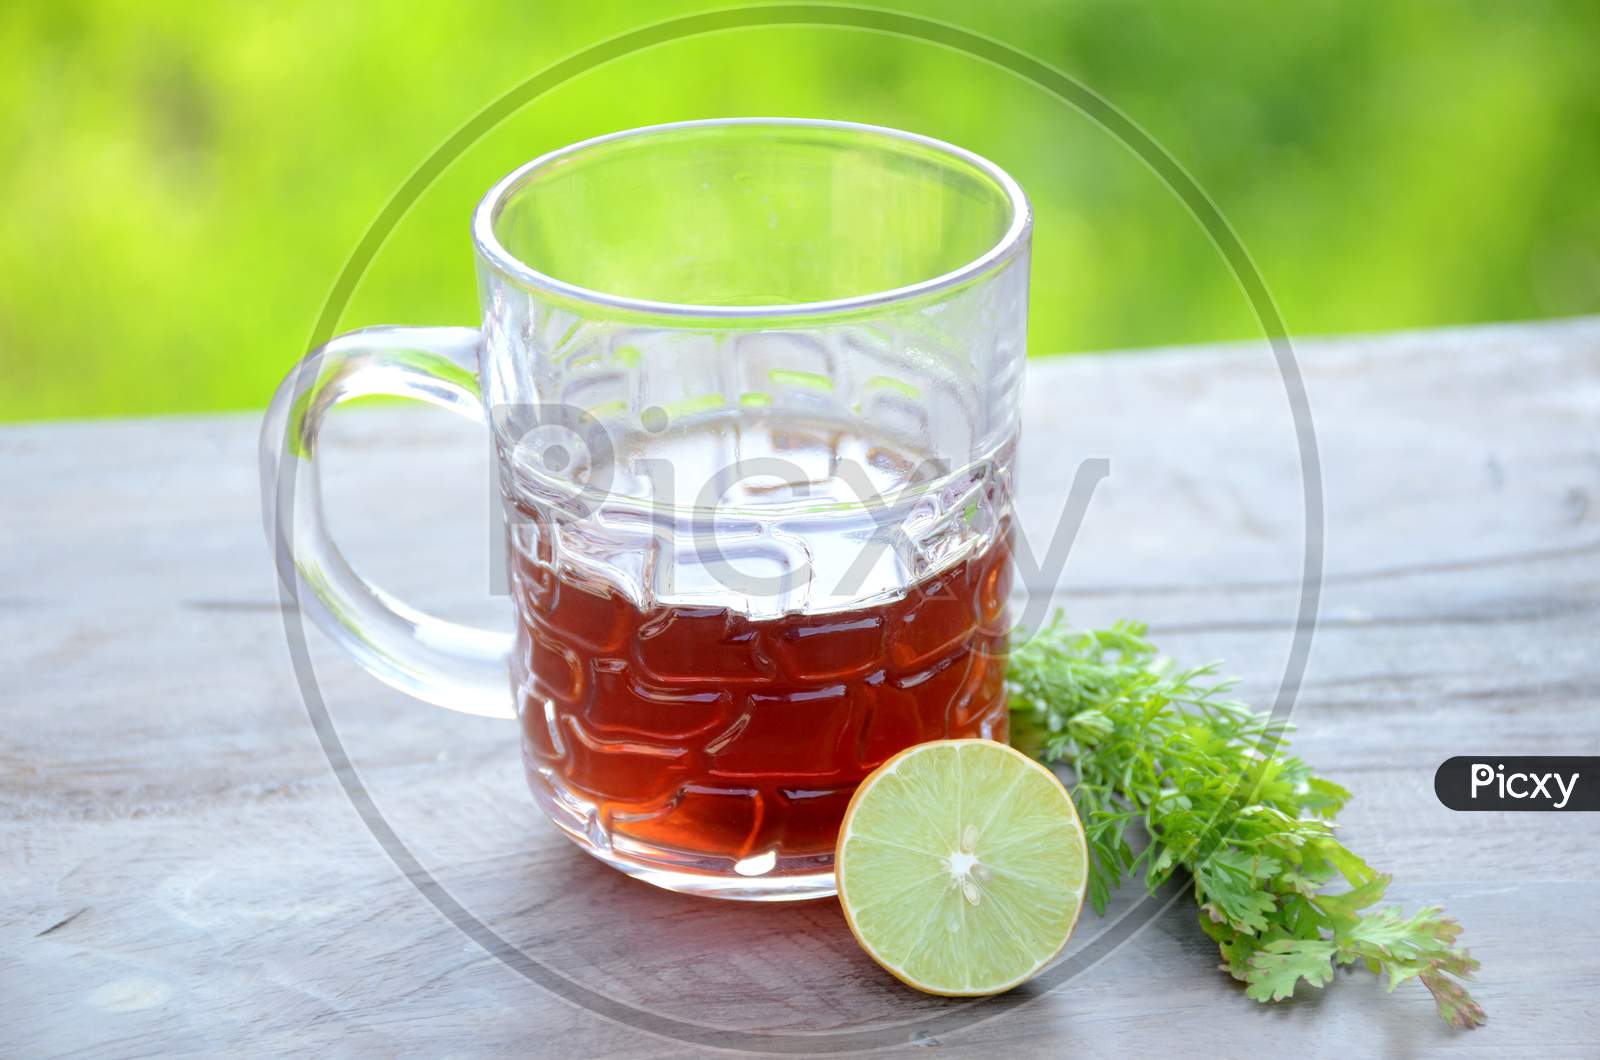 The Black Lemon Tea In The Glass Cup With Anise And Lemon On The Brown Green Background.